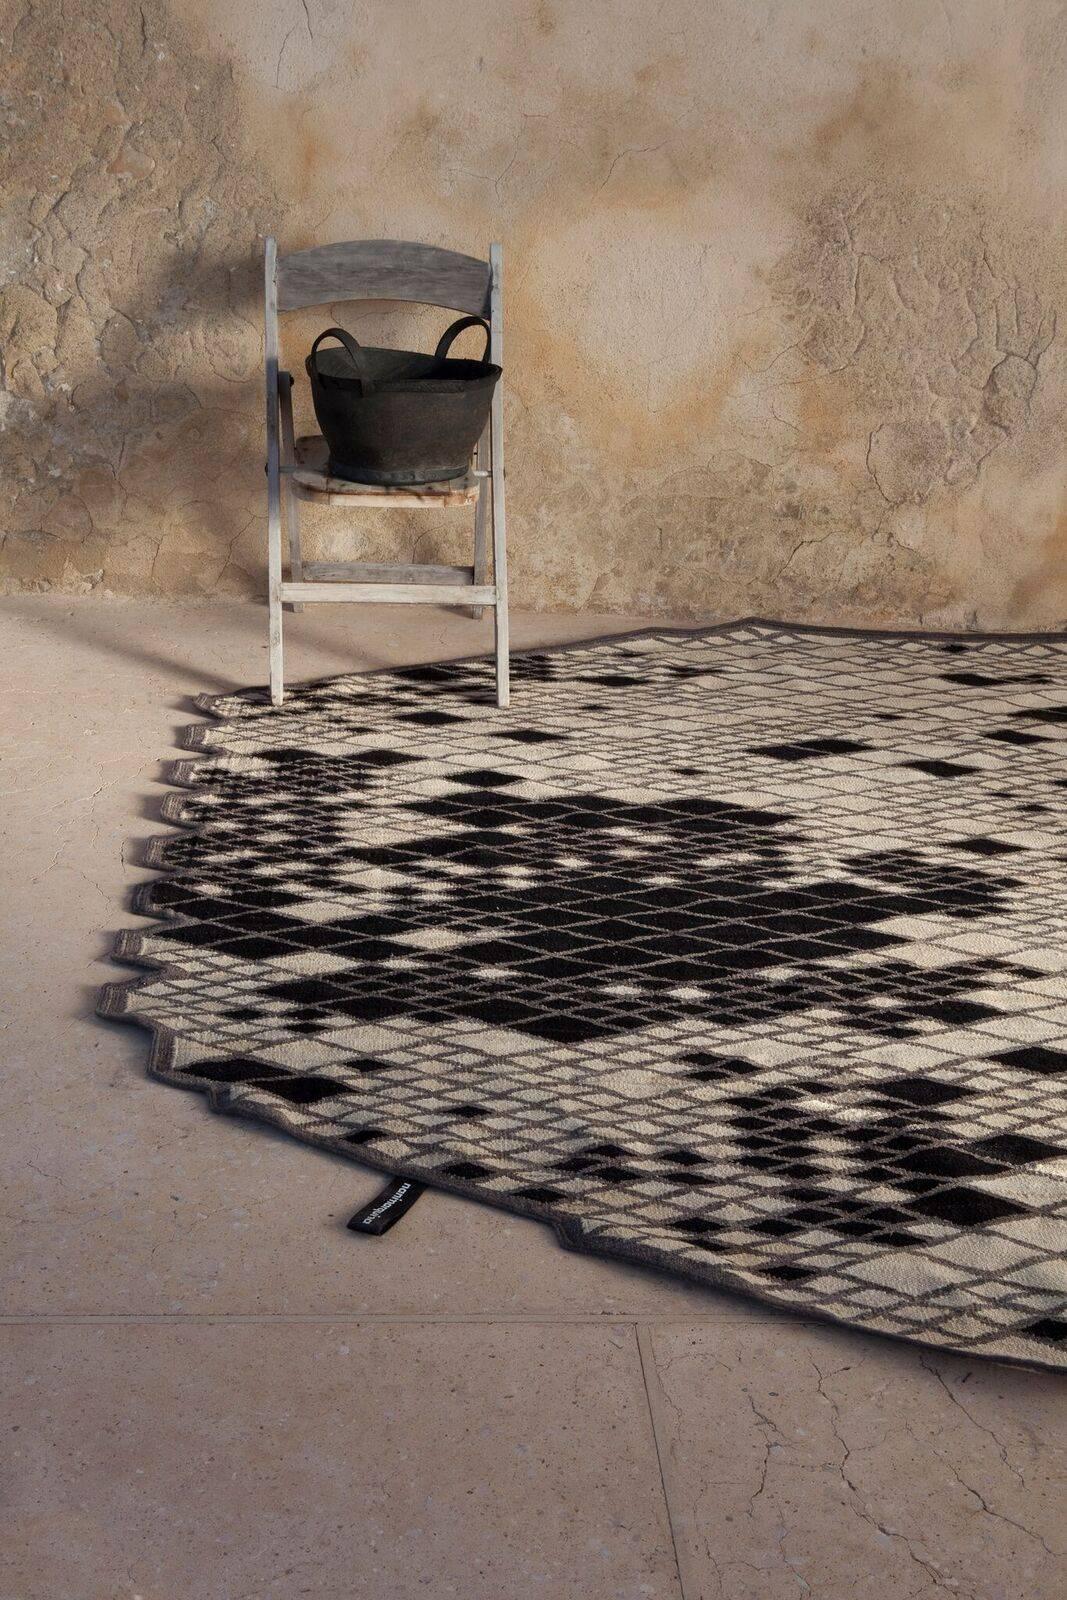 With the Losanges collection, the Bouroullec brothers continue their study of simplicity and elegance, reinterpreting the traditional Persian rug by using ancient Kilim techniques.

Technically complex, the Losanges collection requires great skill